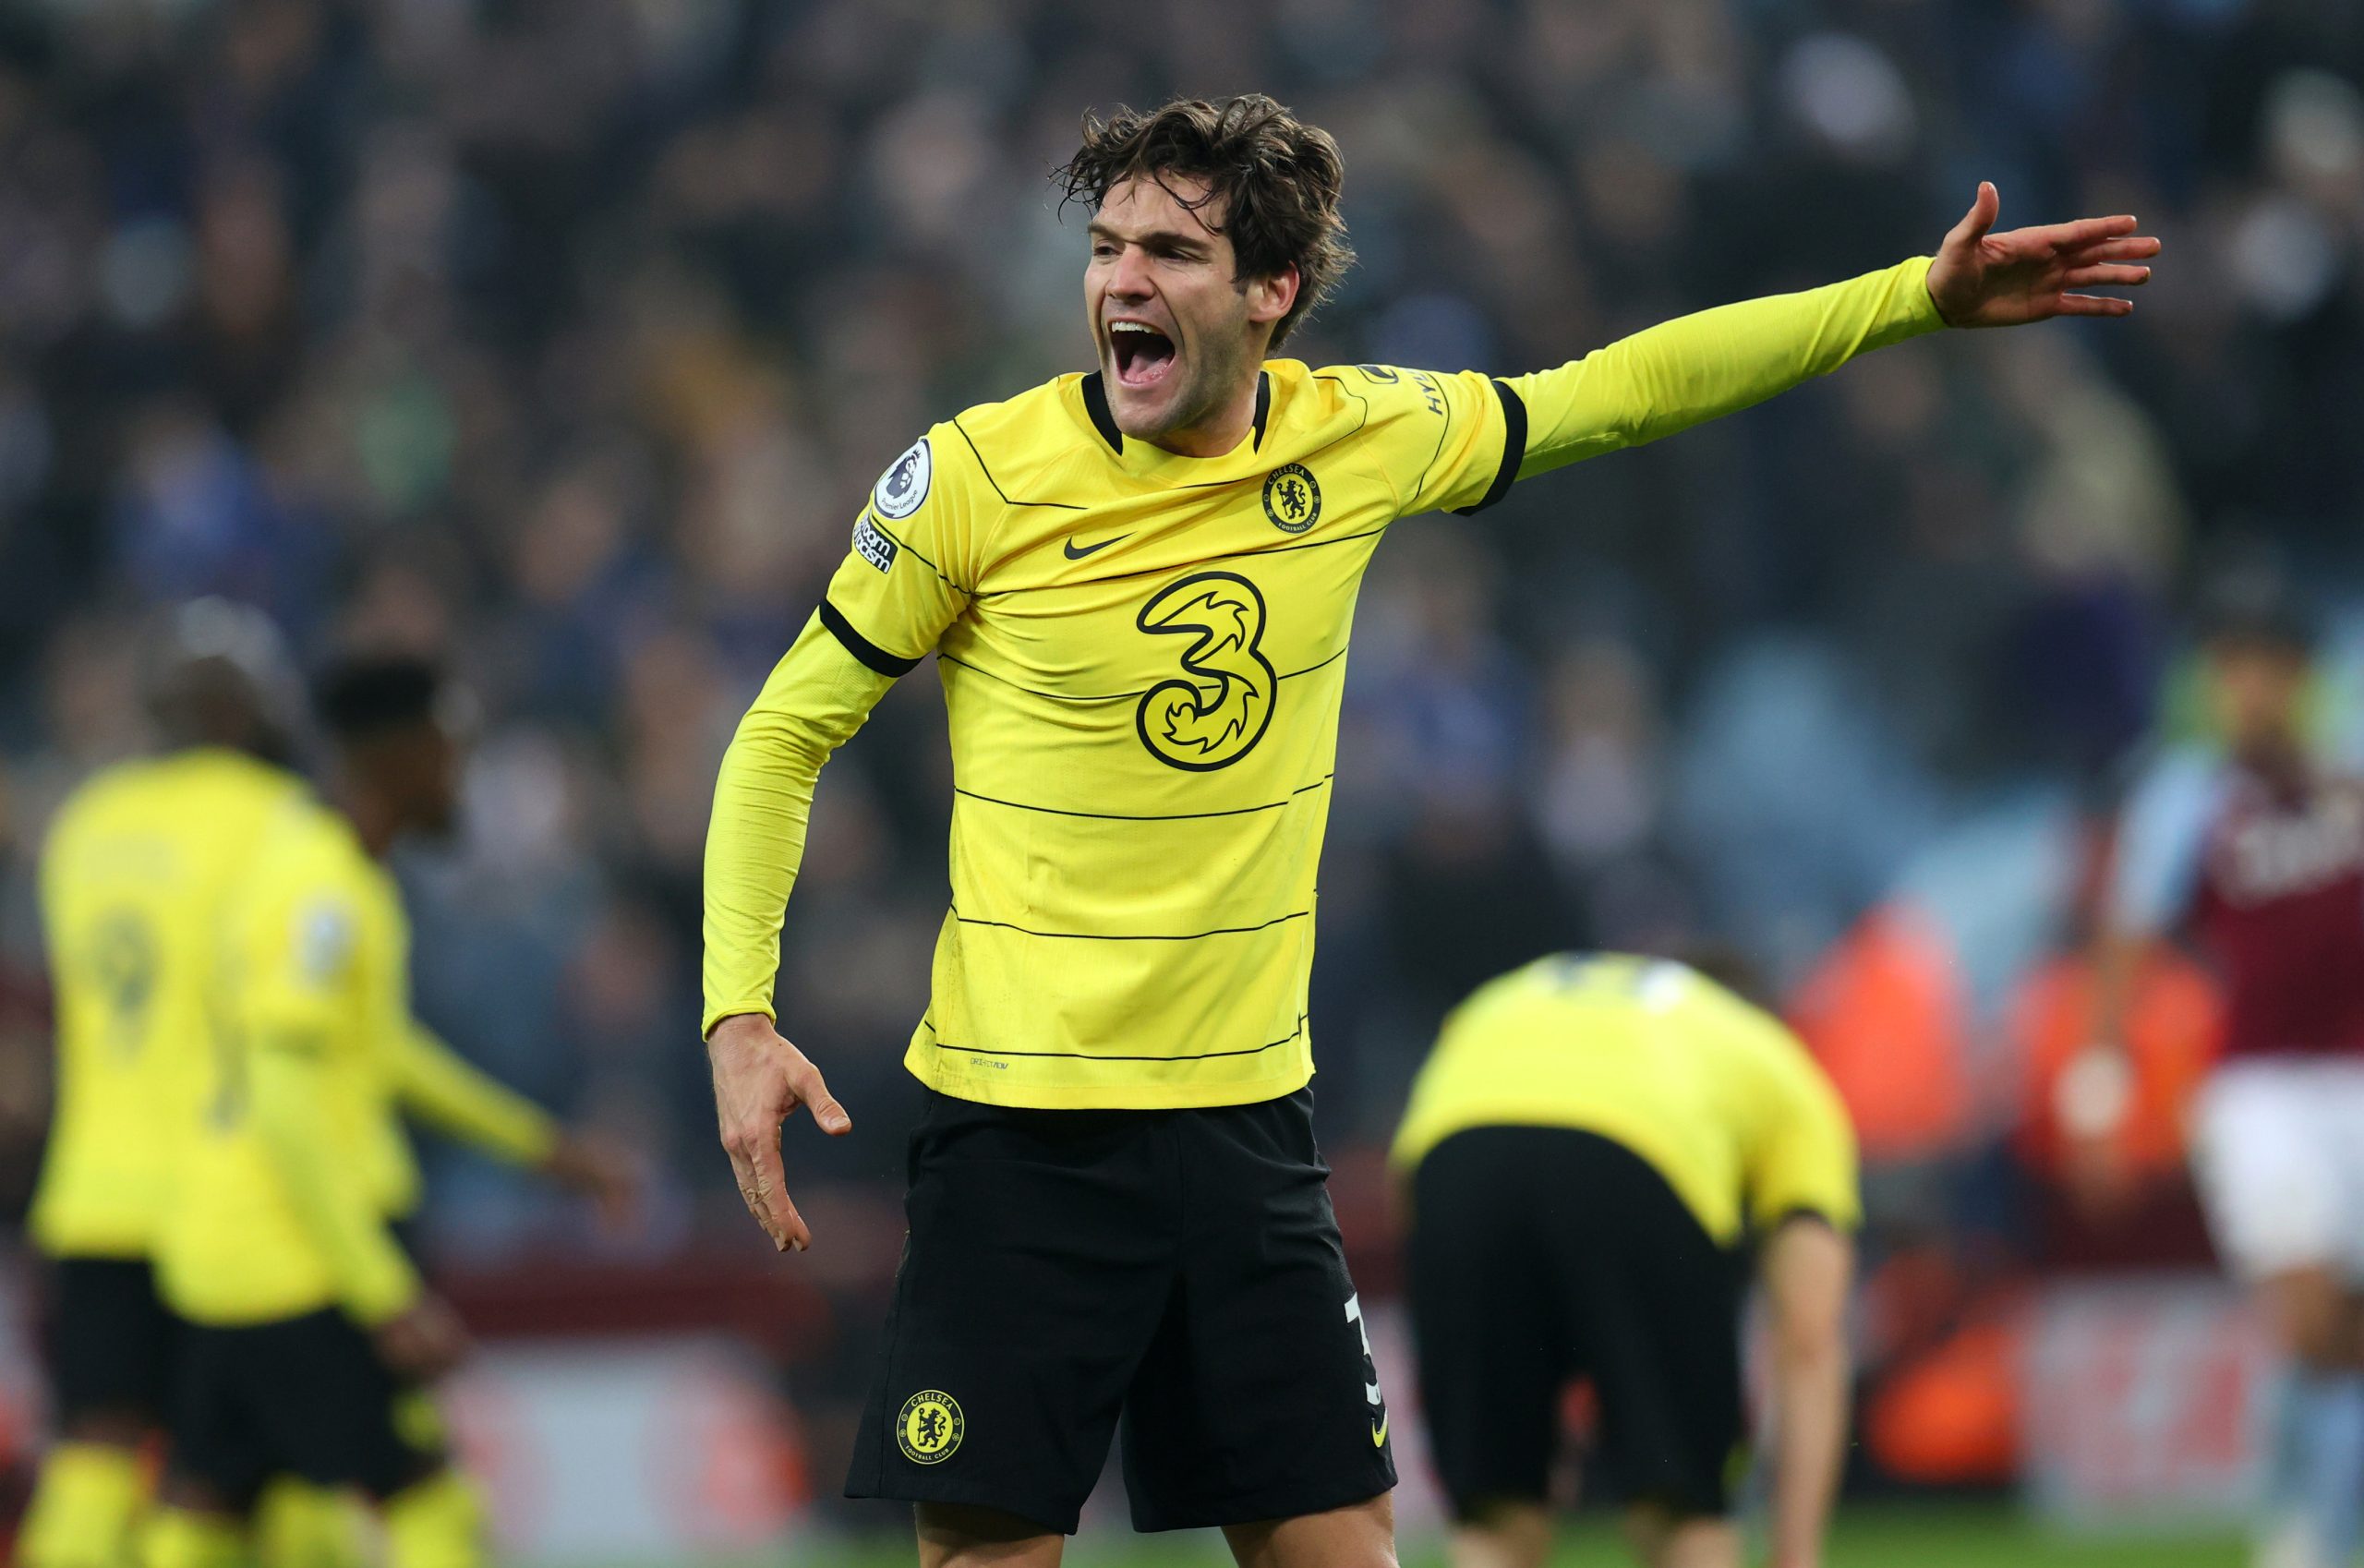 The agent of Chelsea star Marcos Alonso is in London to accelerate his move to Barcelona.